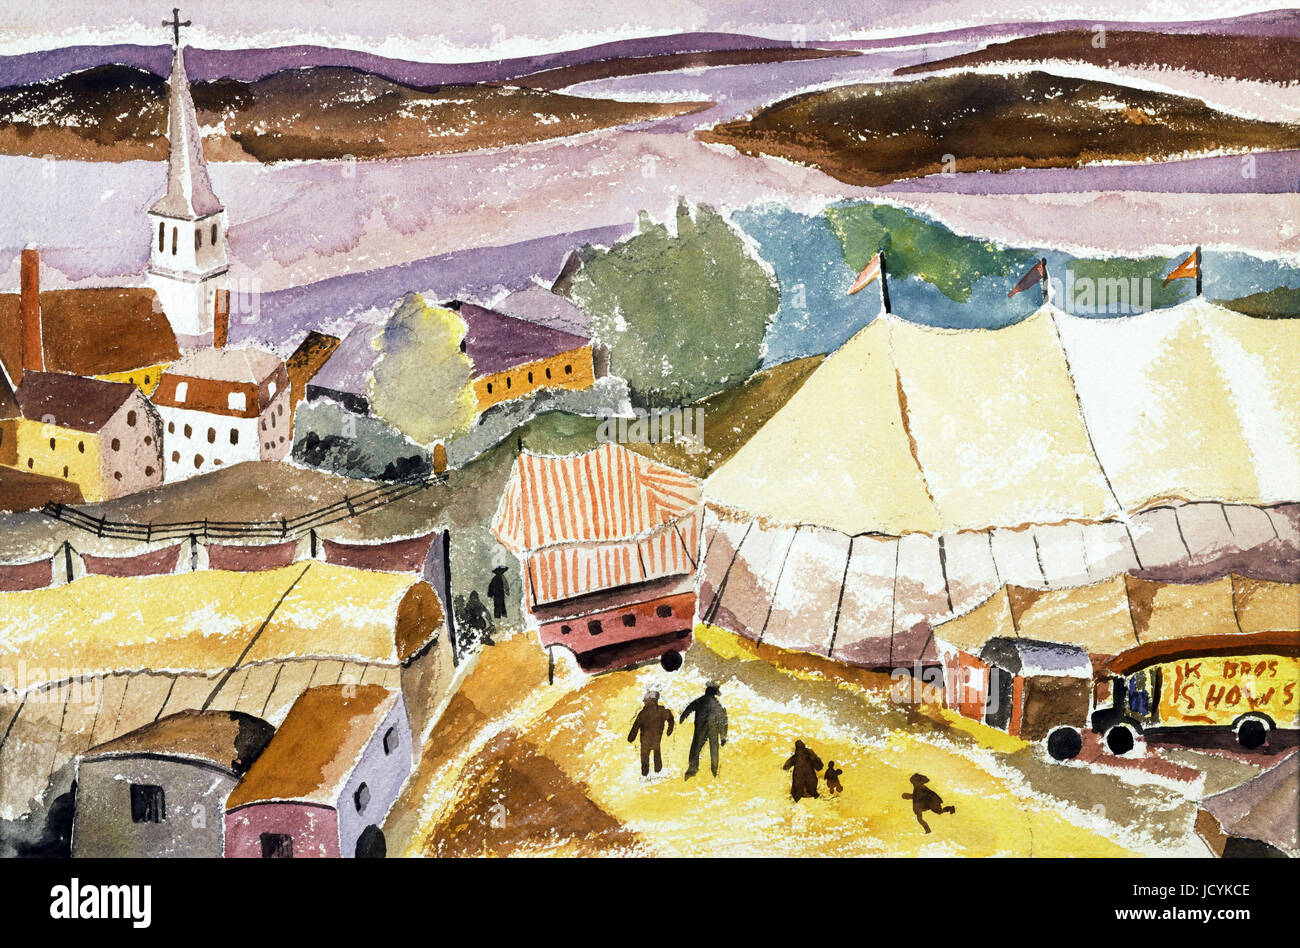 Hugh Collins, The Circus Comes to Treport. Undated. Watercolor on paper. The Phillips Collection, Washington, D.C., USA. Stock Photo